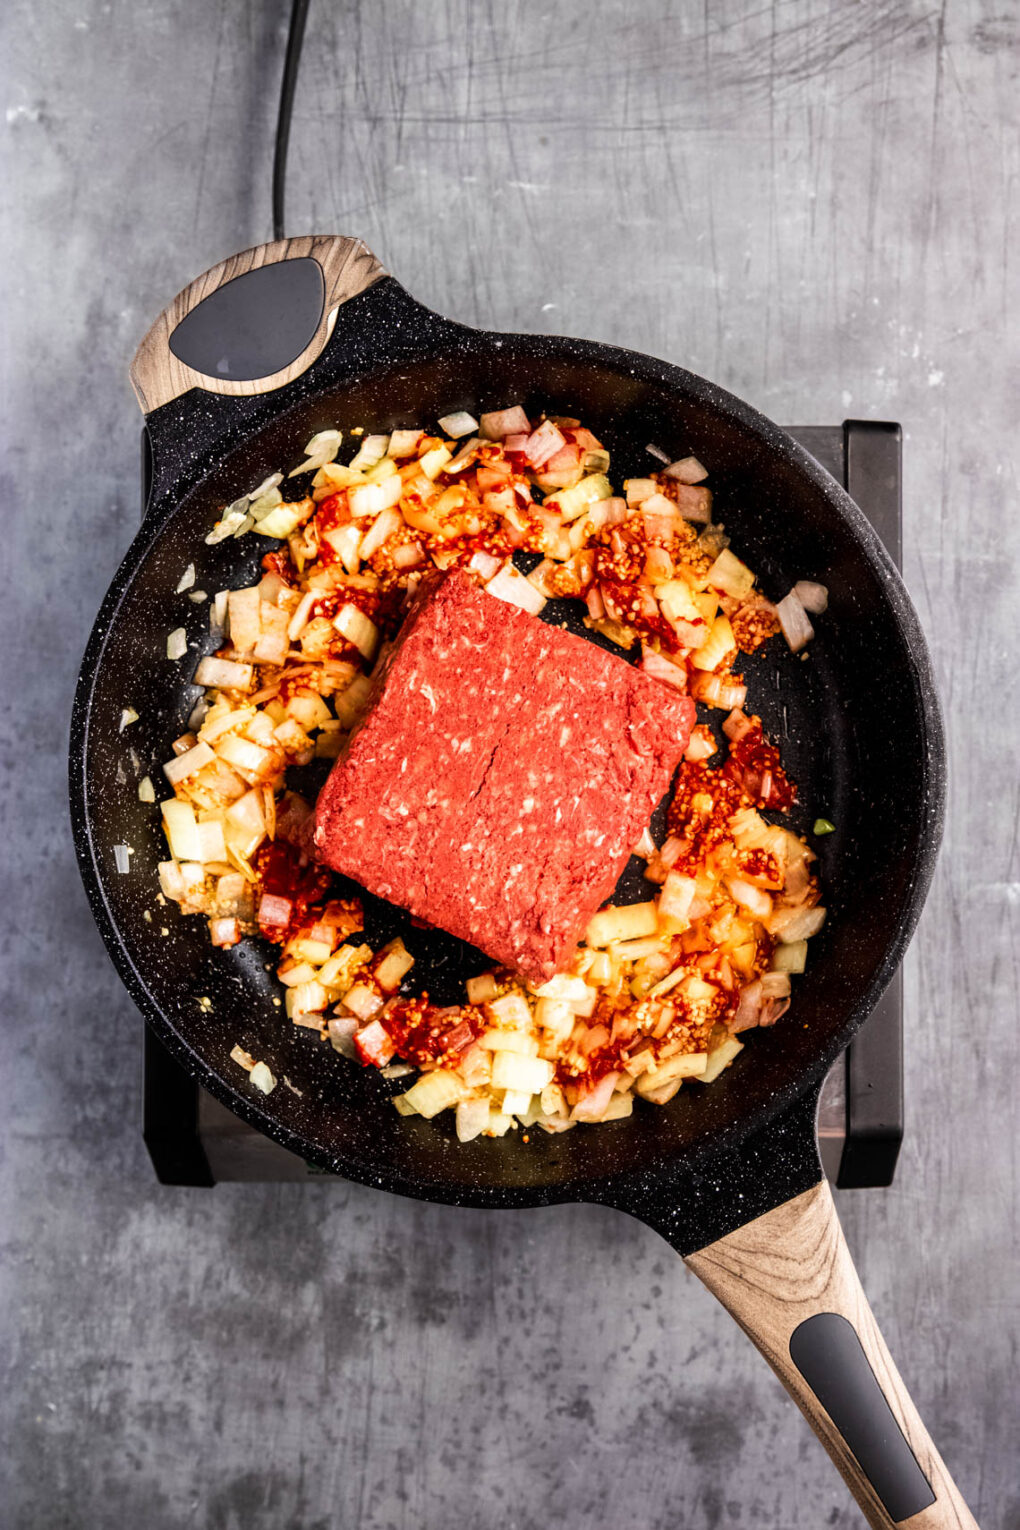 Meat in skillet with onions and tomatoes